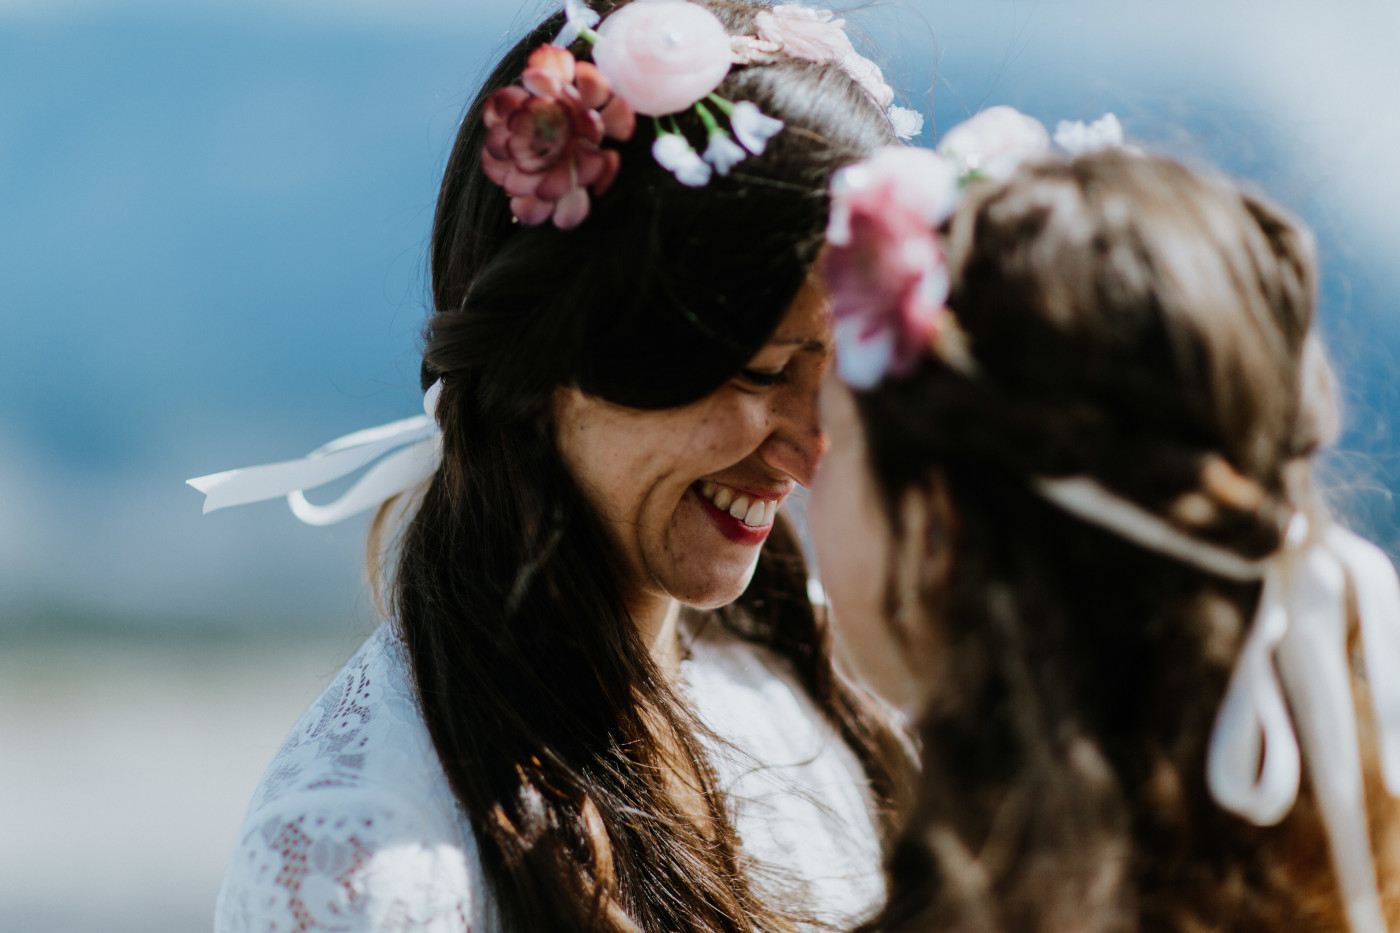 Margaux smiles. Elopement photography at Mount Hood by Sienna Plus Josh.